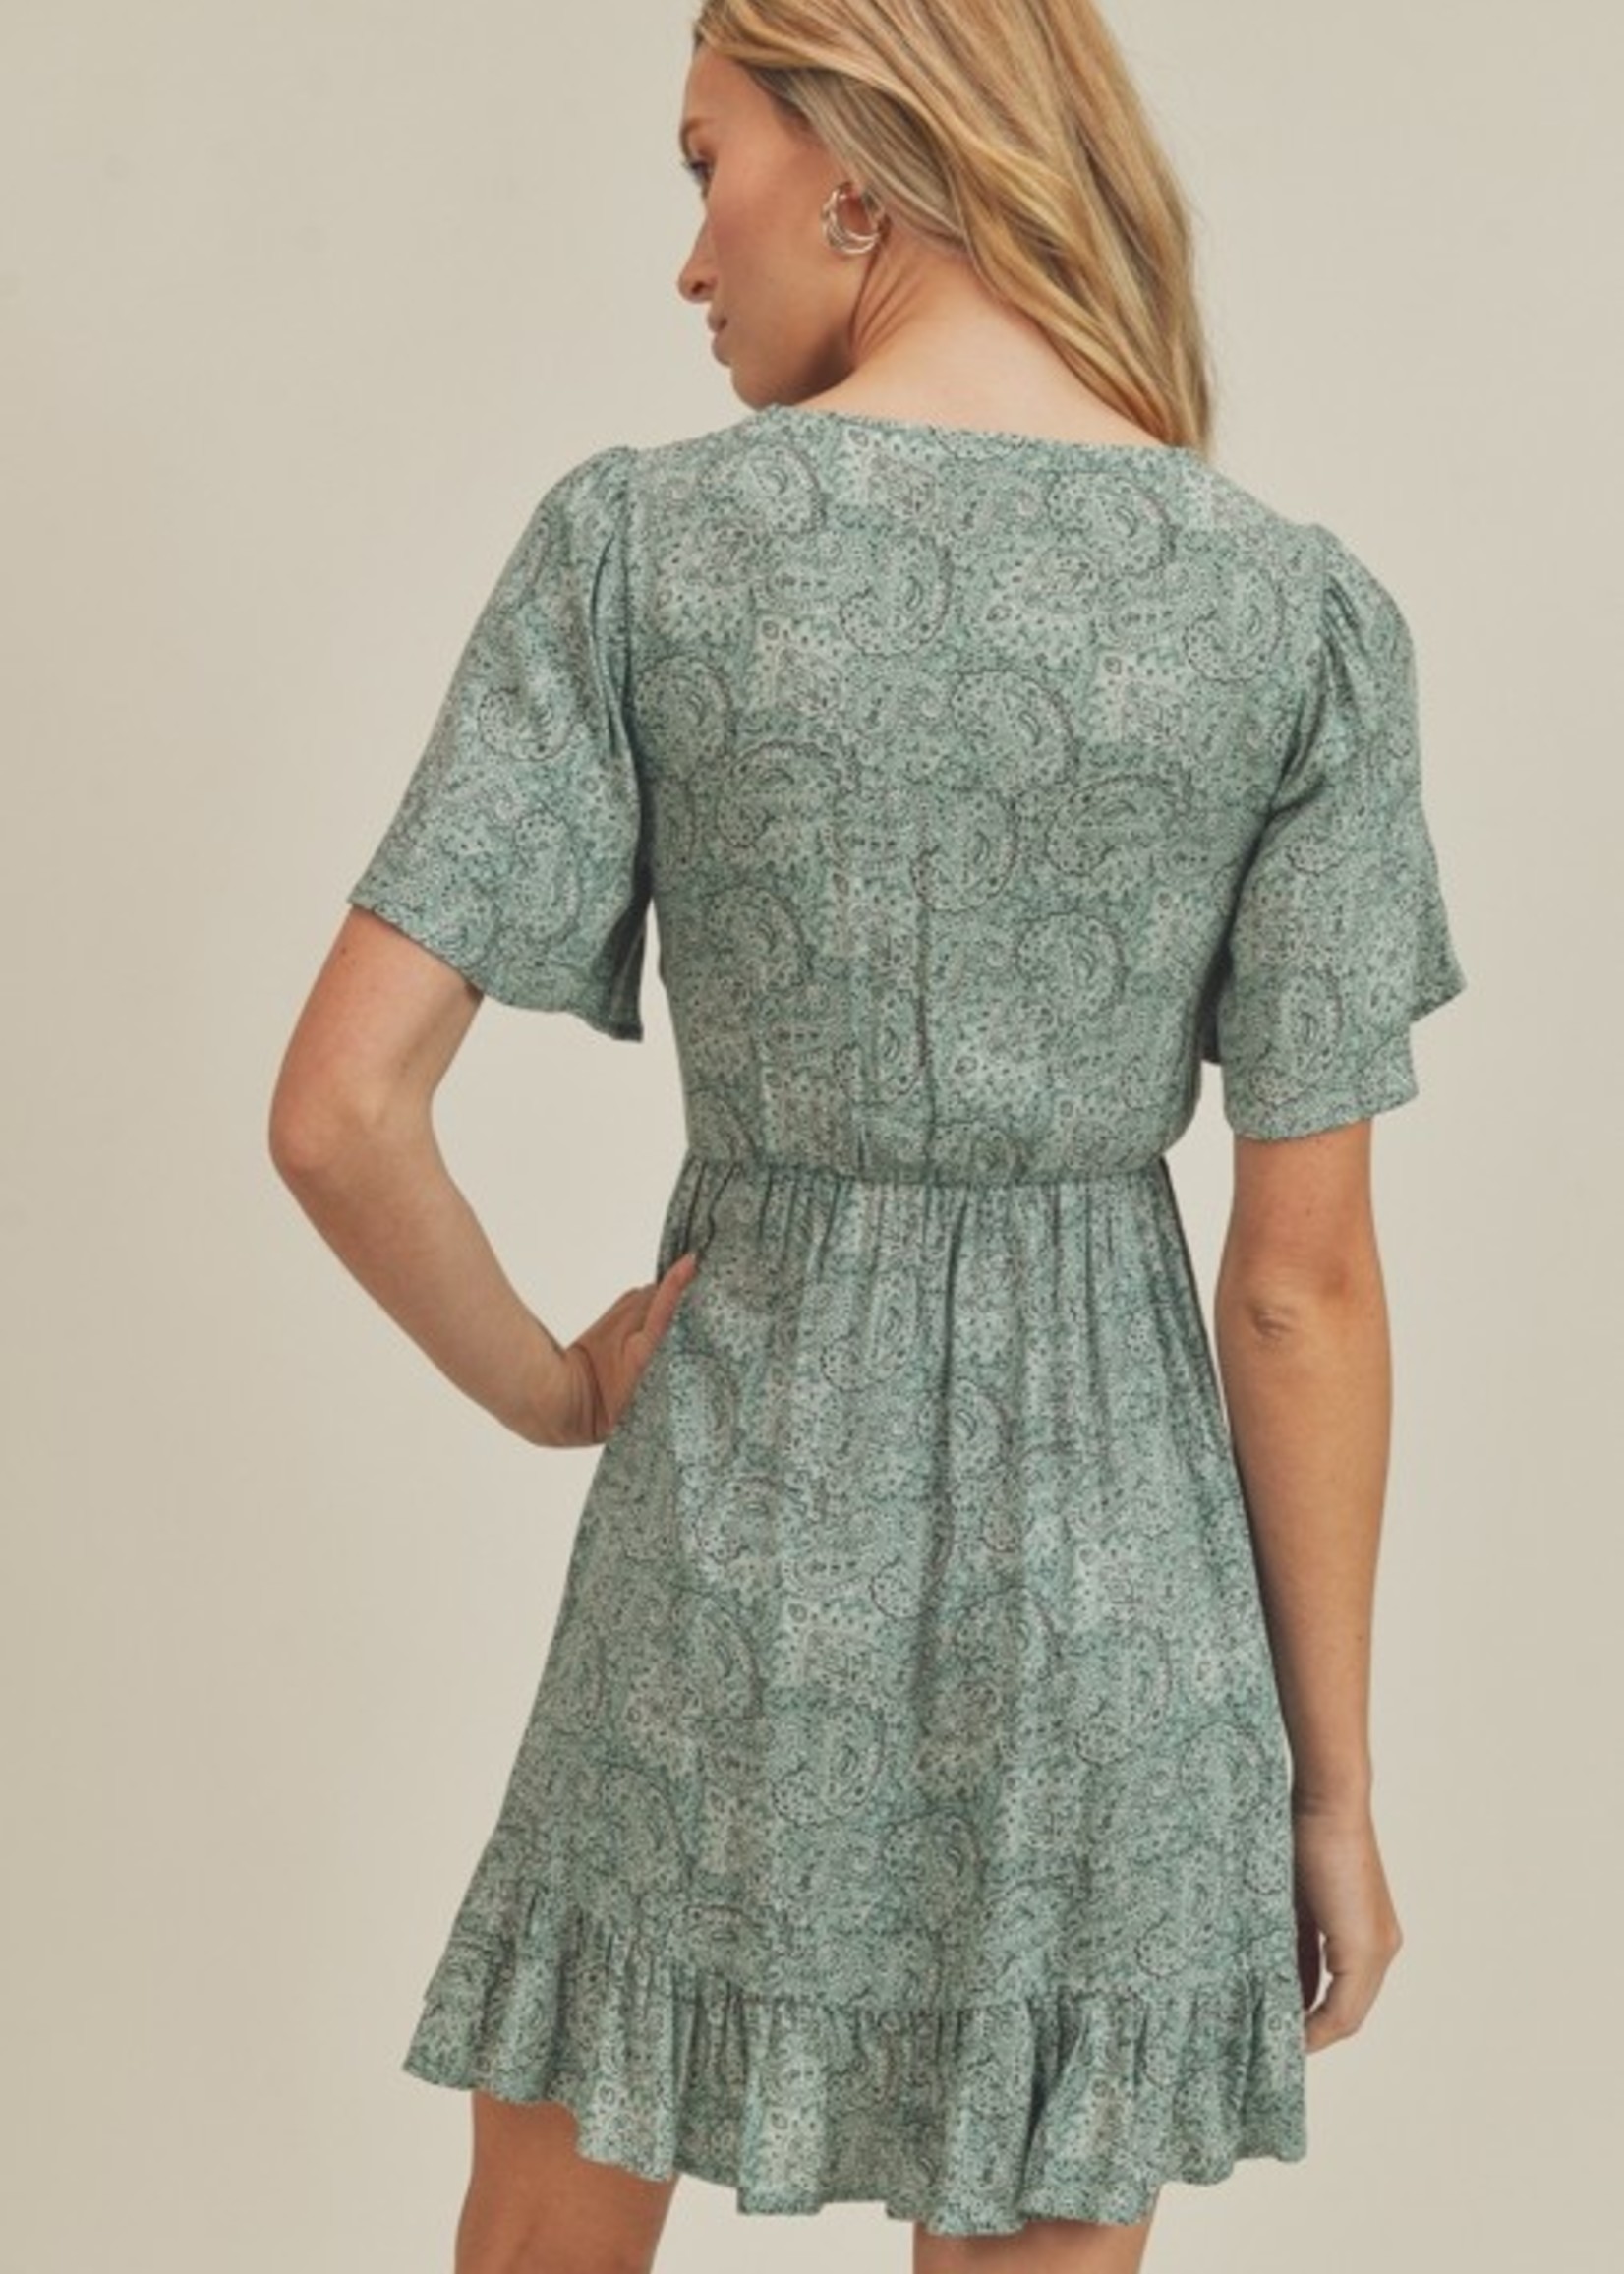 Printed Tie Front Dress - Green